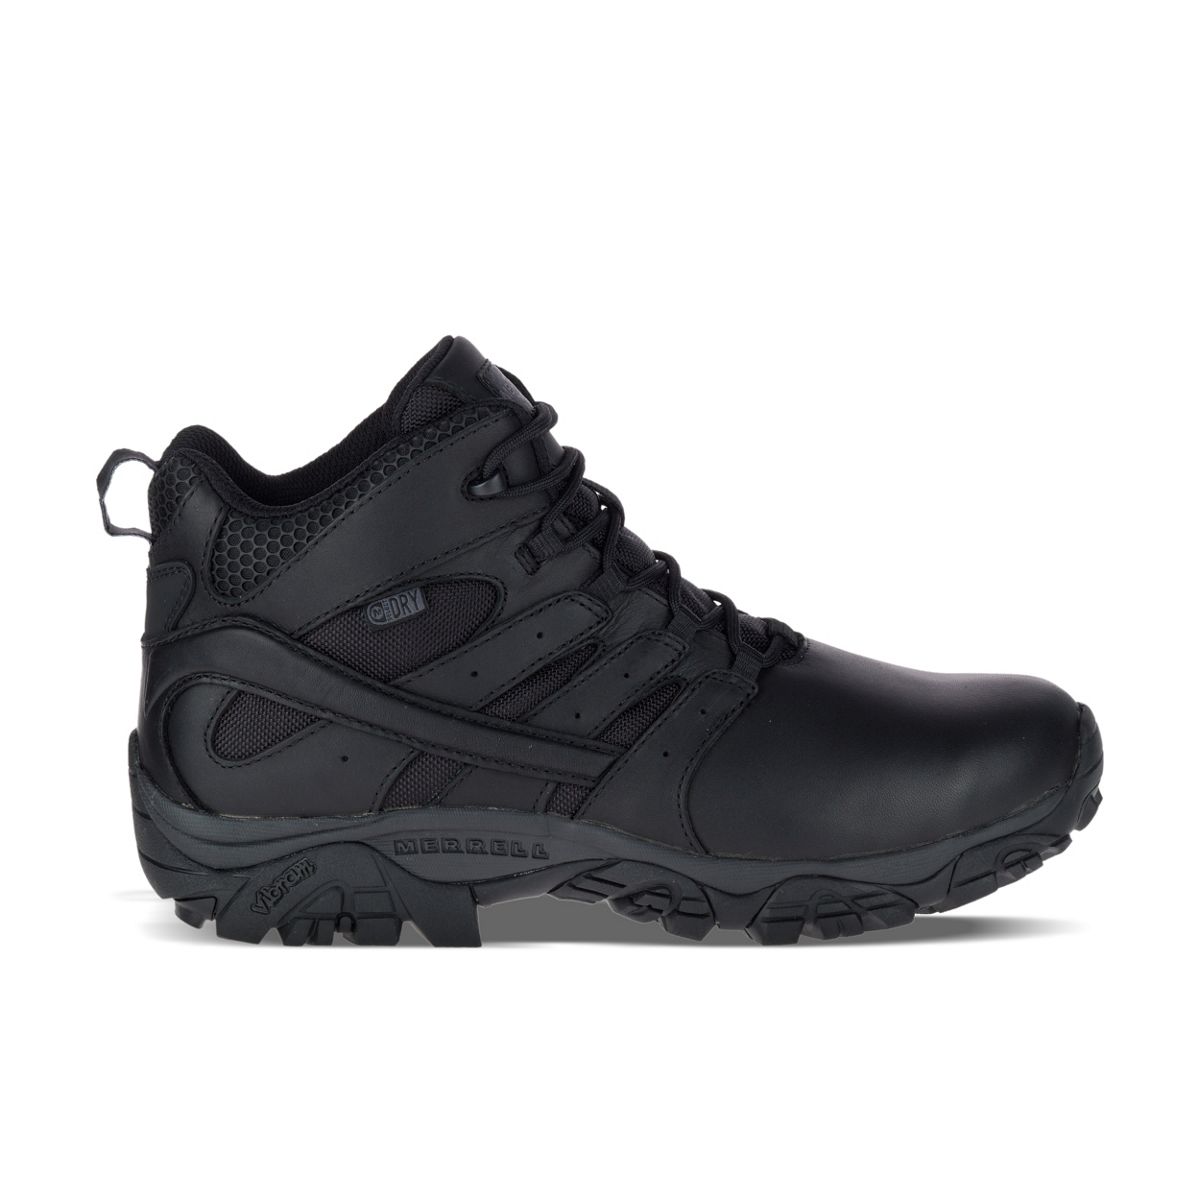 Moab 2 Mid Tactical Response Waterproof Boot - Boots | Merrell